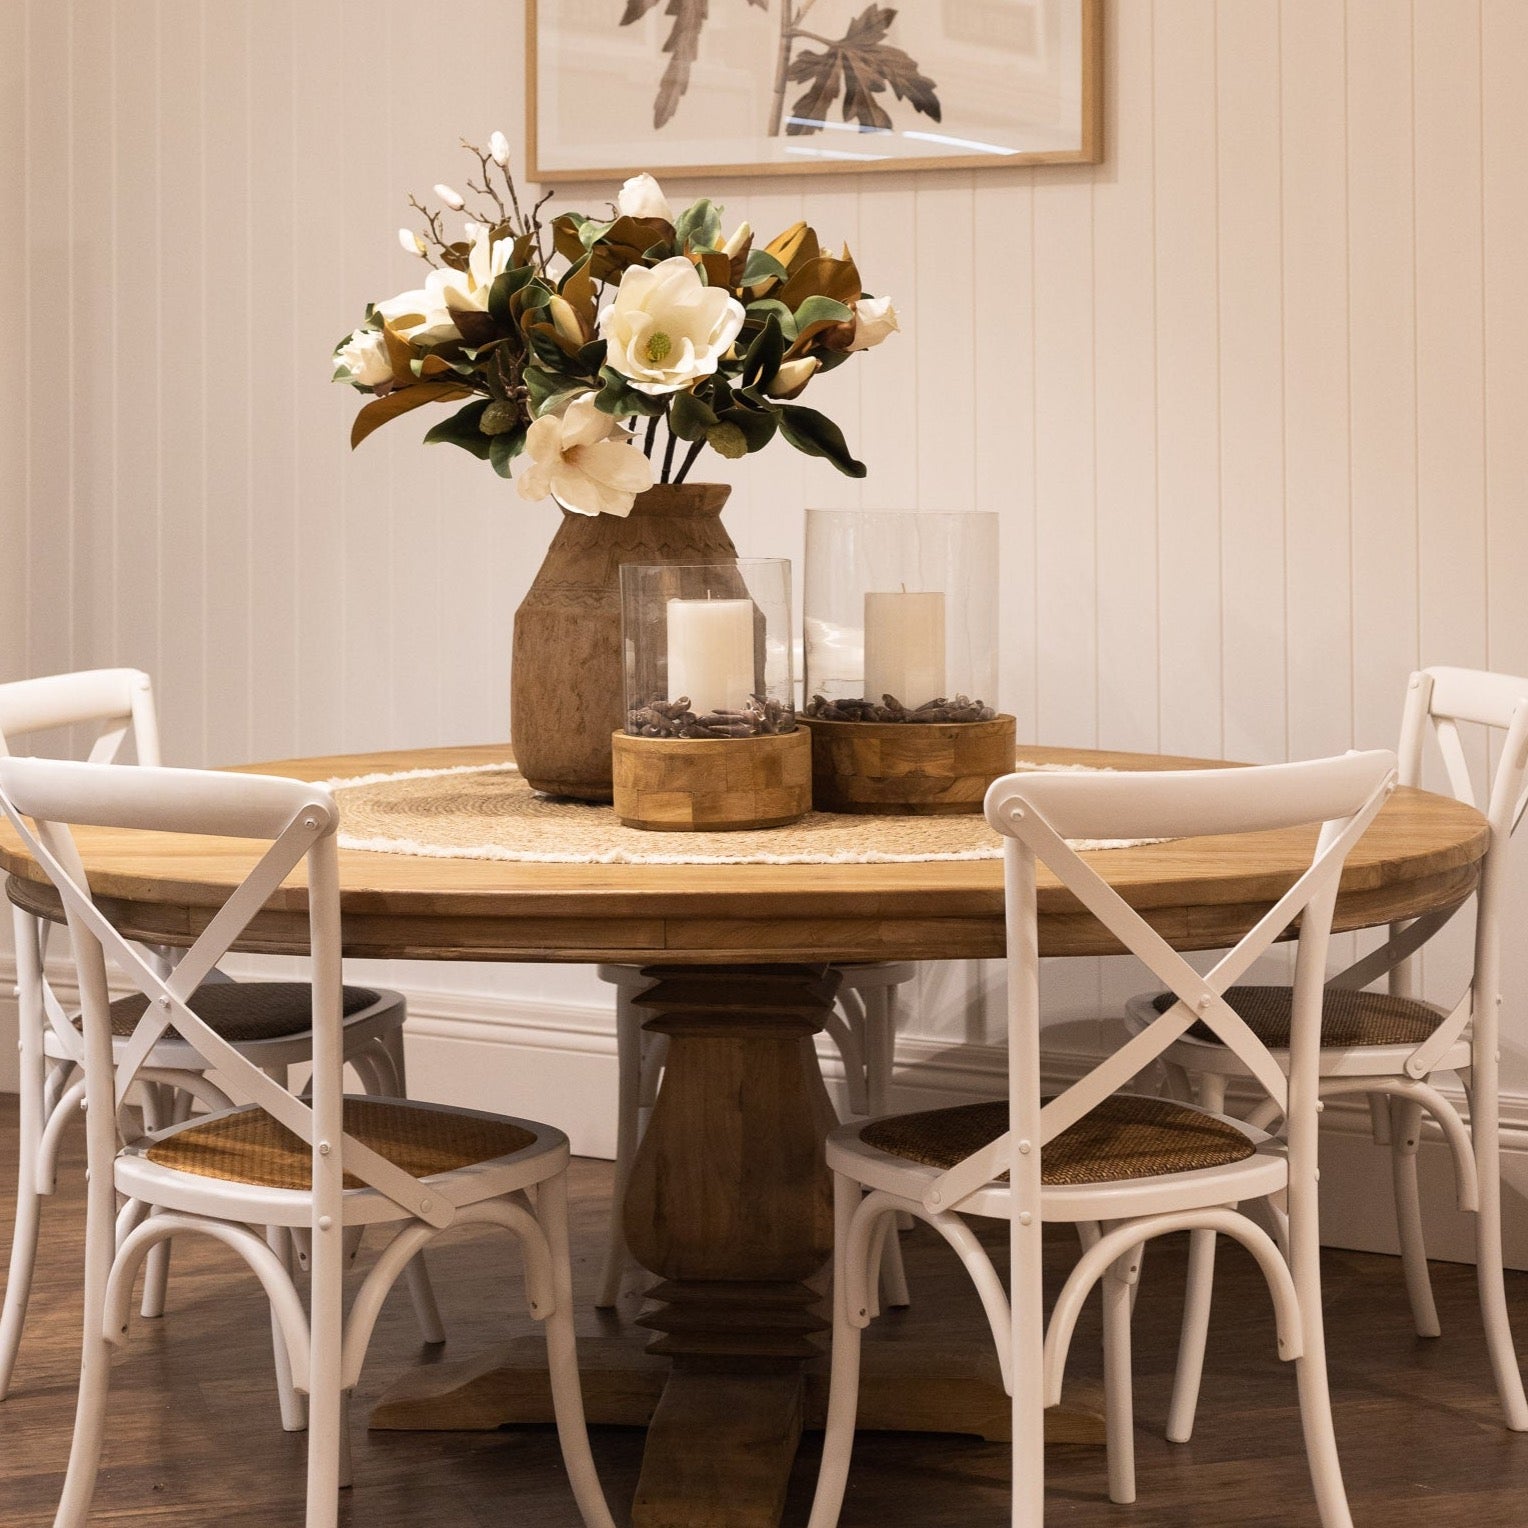 Mulhouse Round Dining Table | 3 Sizes